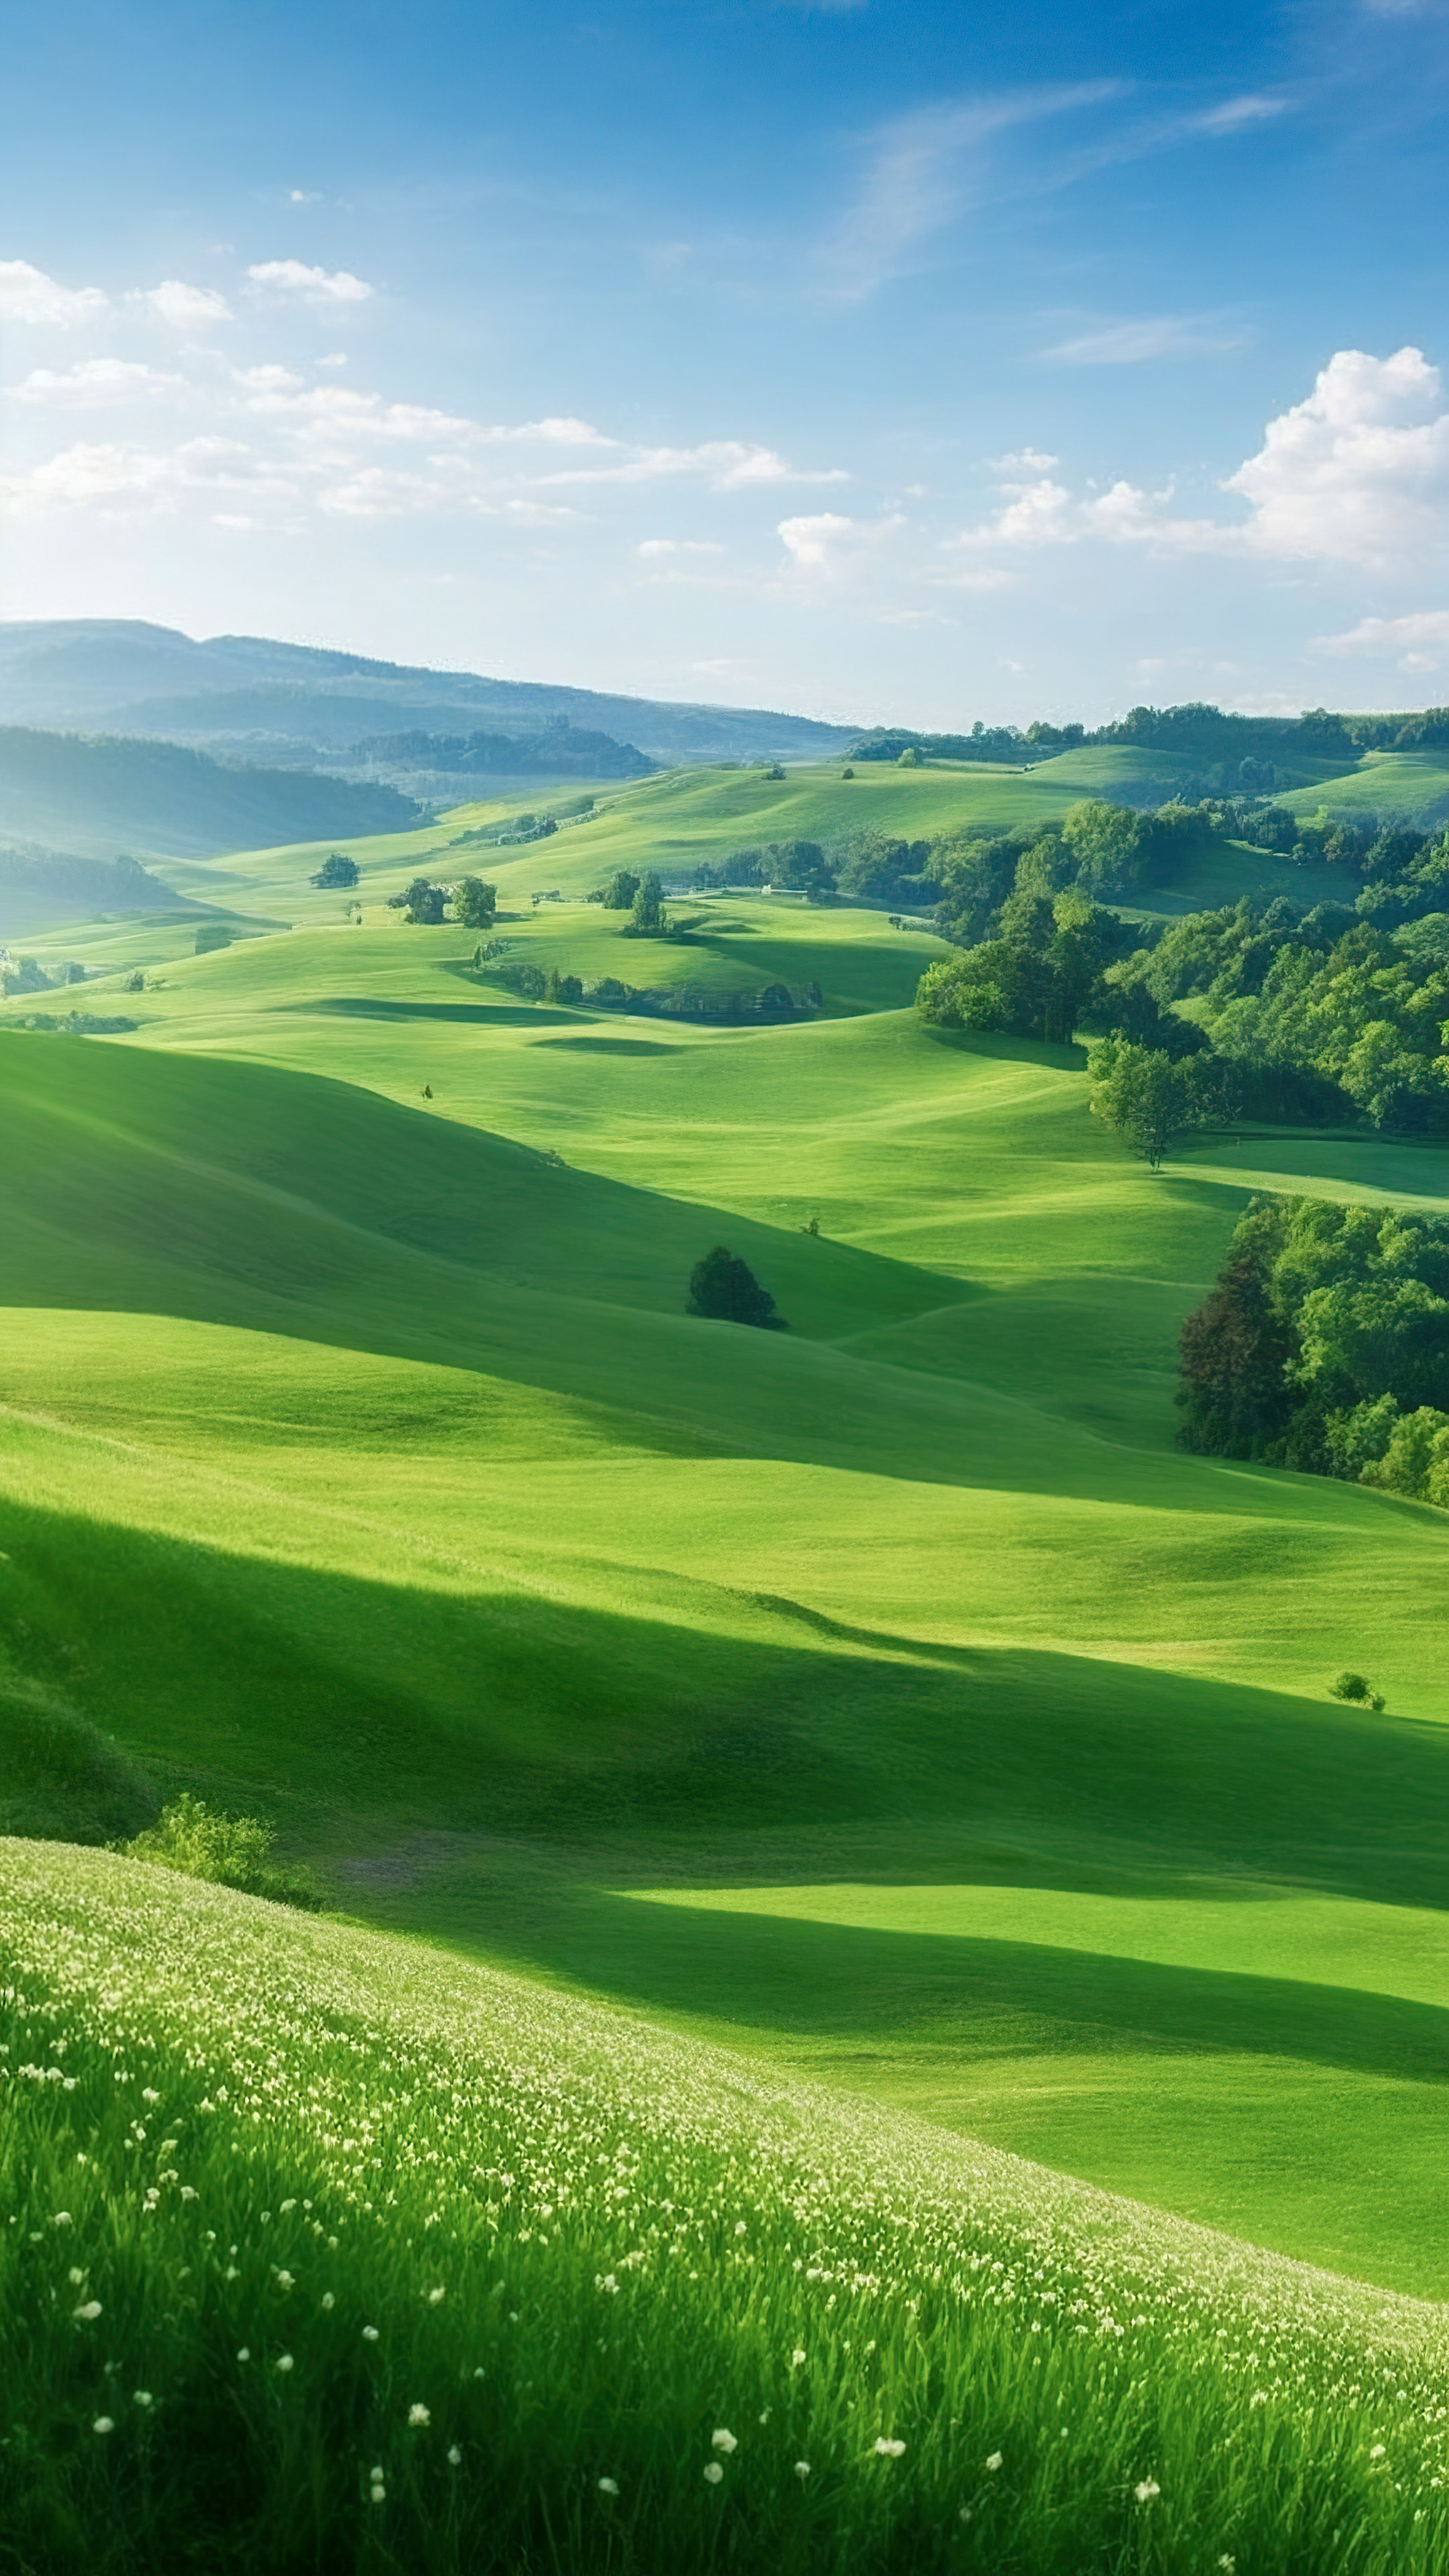 Experience the tranquility with our pretty nature wallpaper, depicting a peaceful countryside scene with rolling hills, green pastures, and a clear day’s sky.